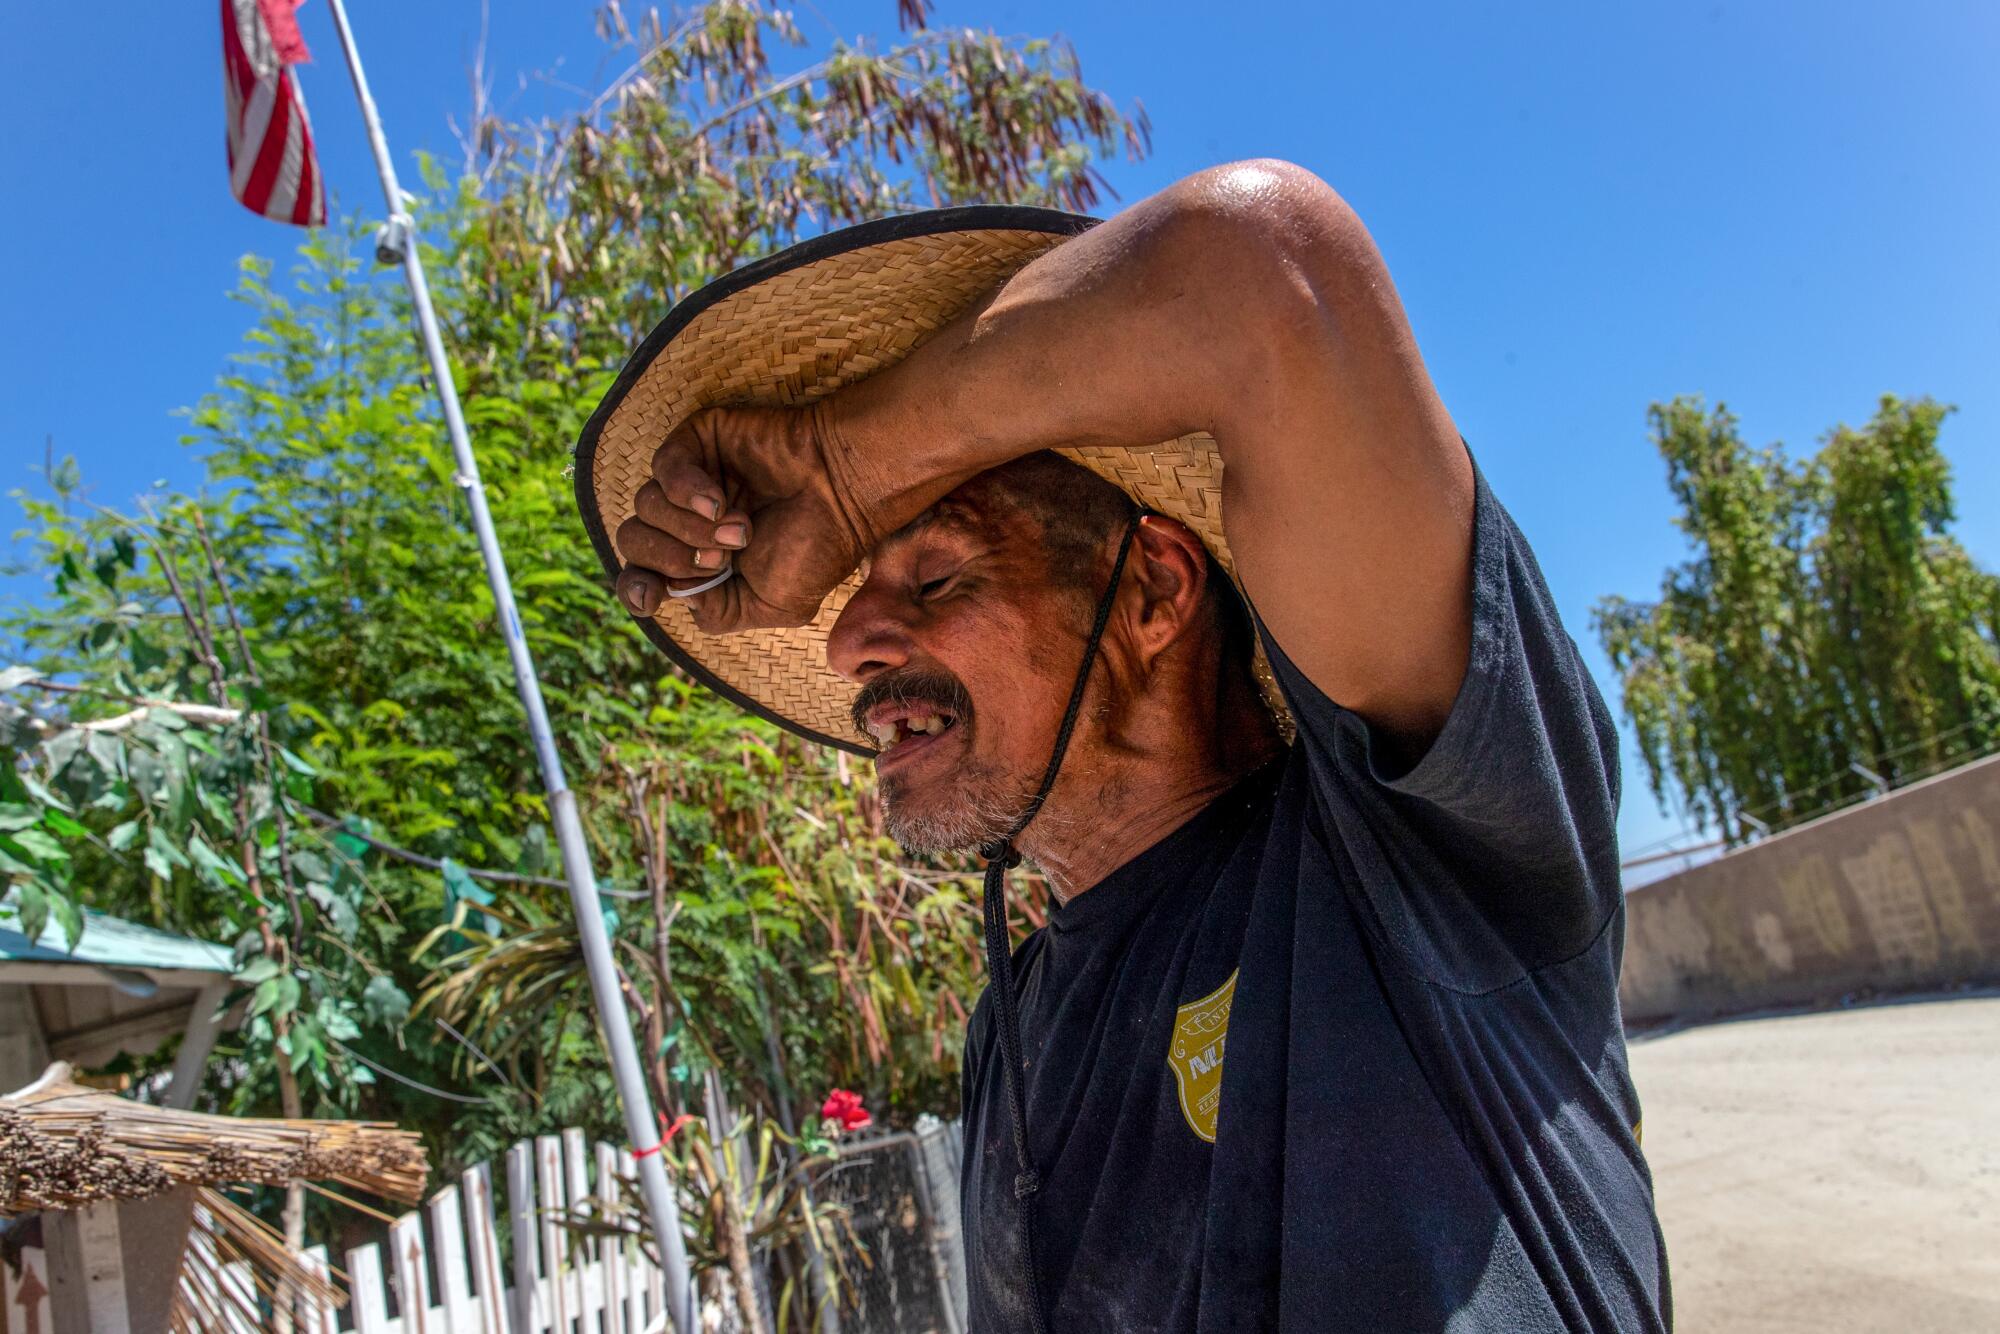 A man in a hat wipes his brow while working under the blazing sun at a mobile home park in Thermal, Calif.